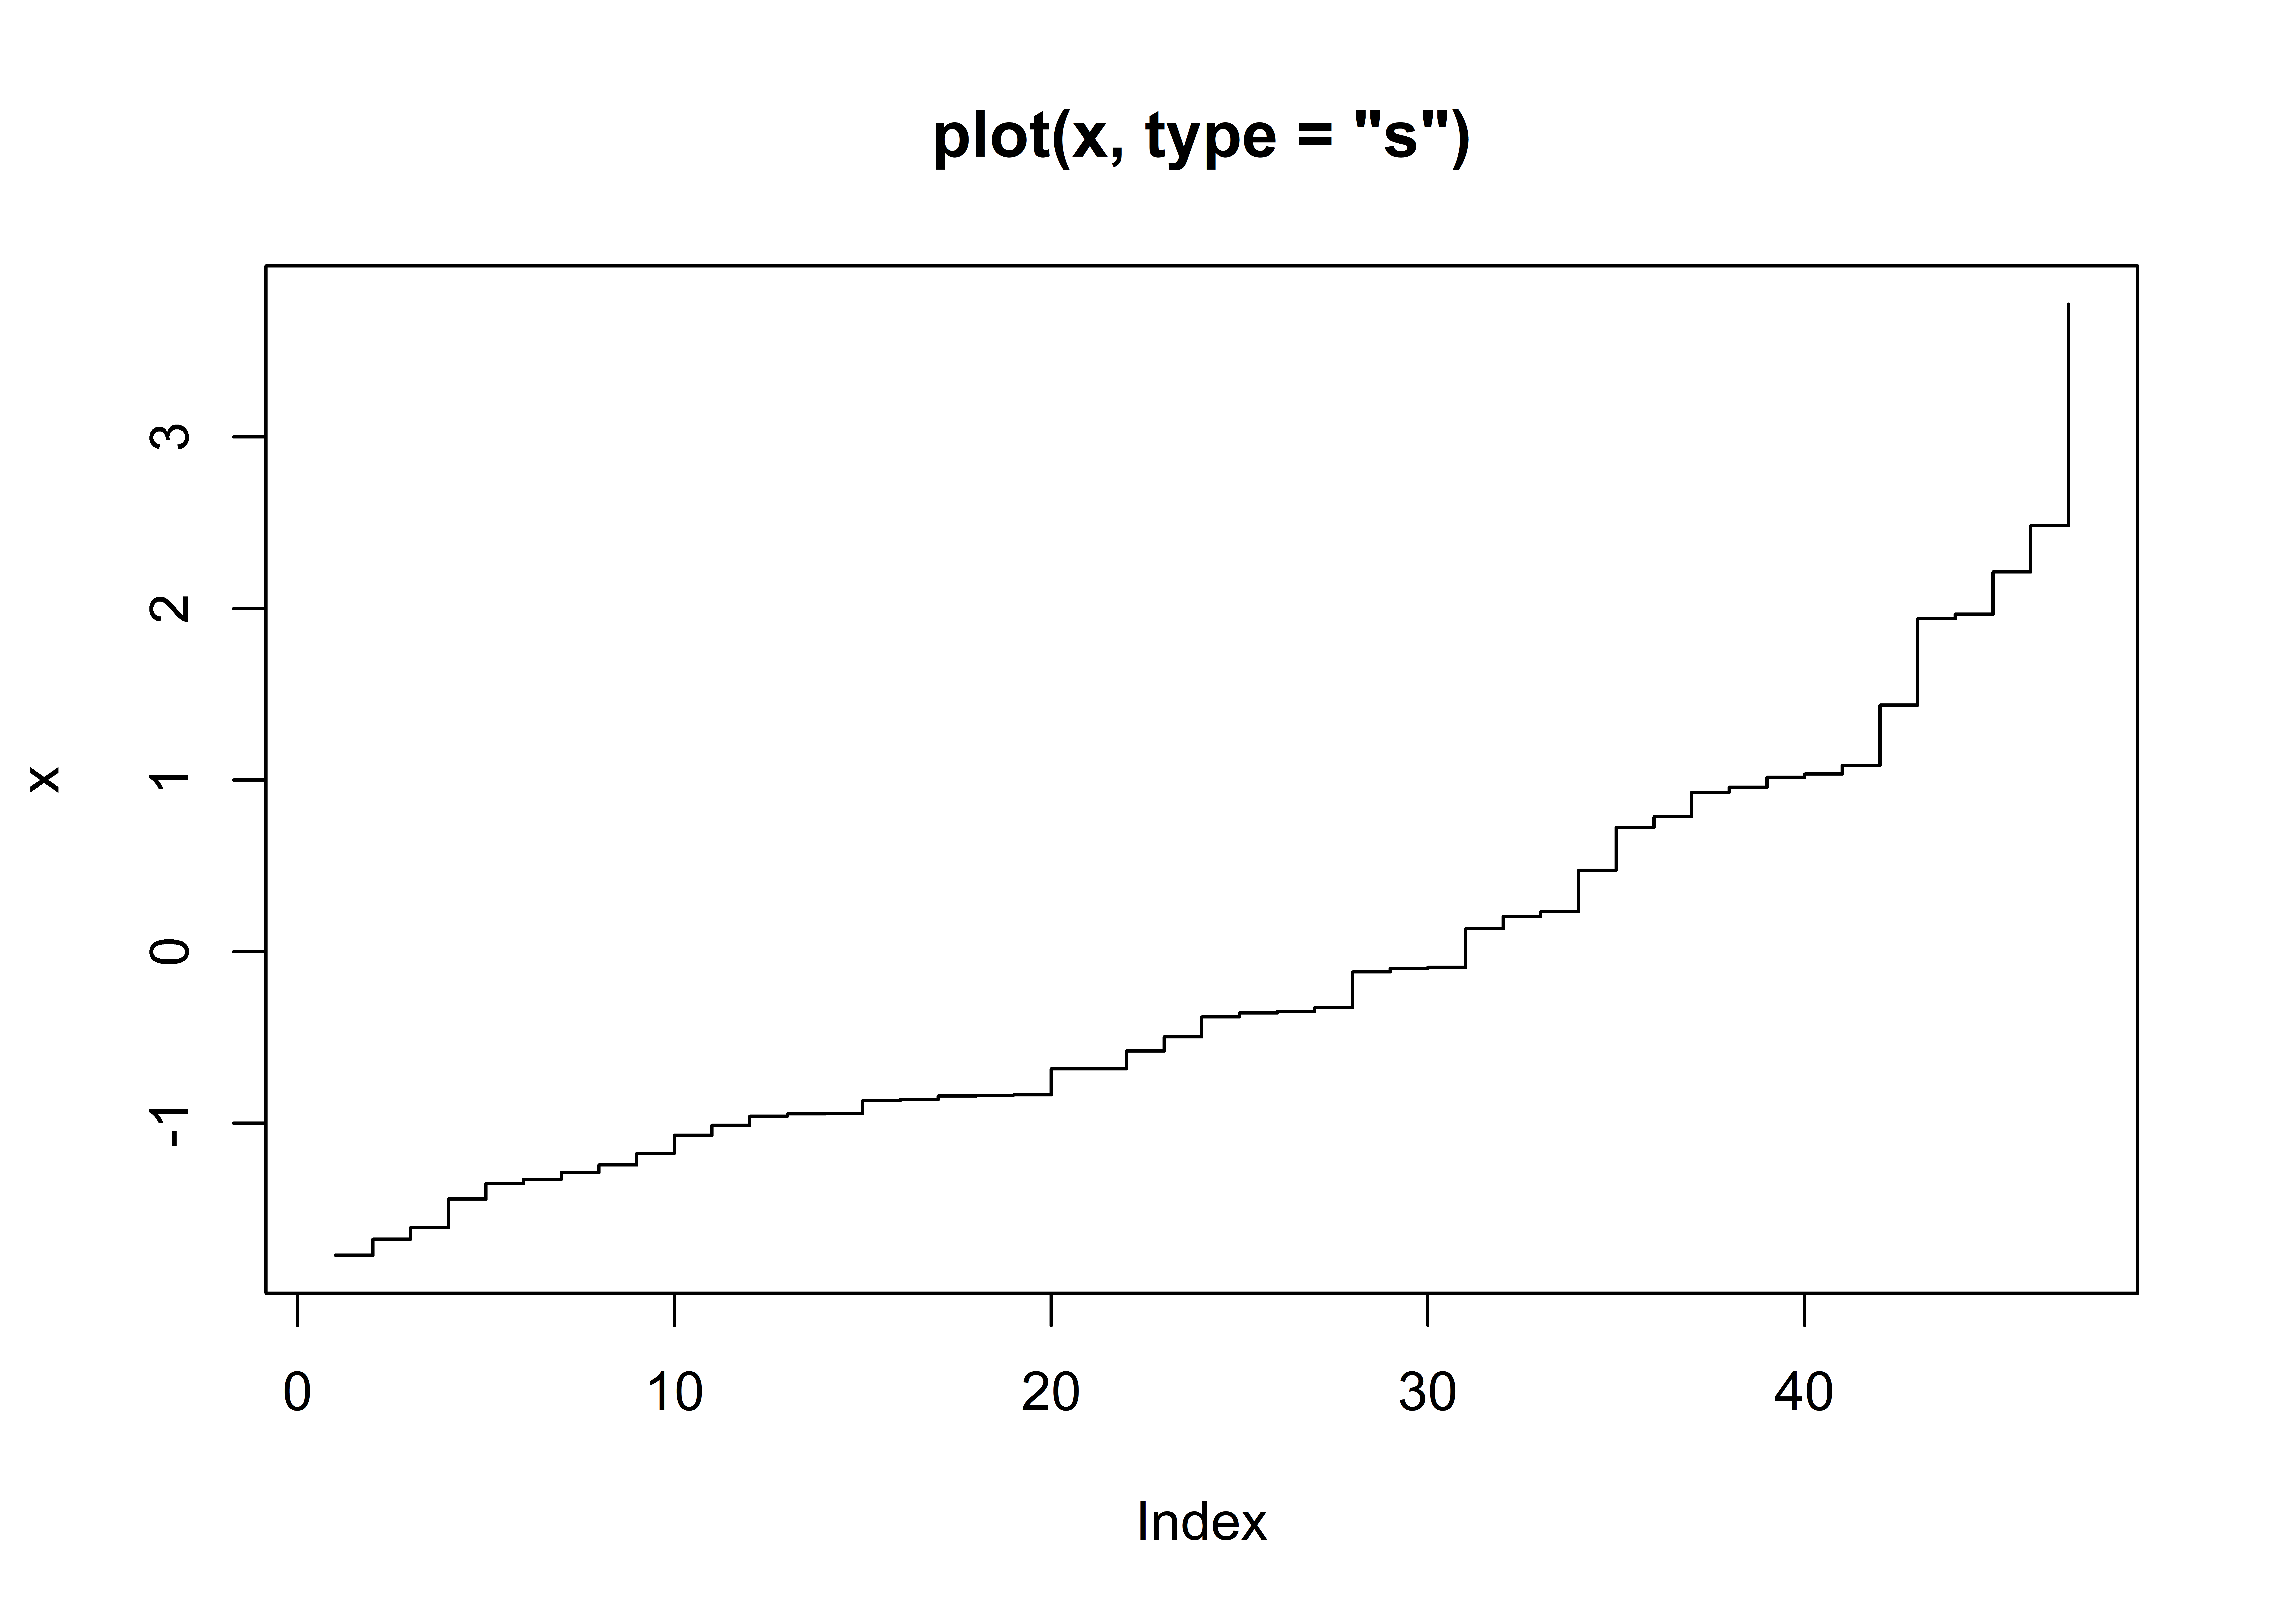 Plot generated by R's plot function.